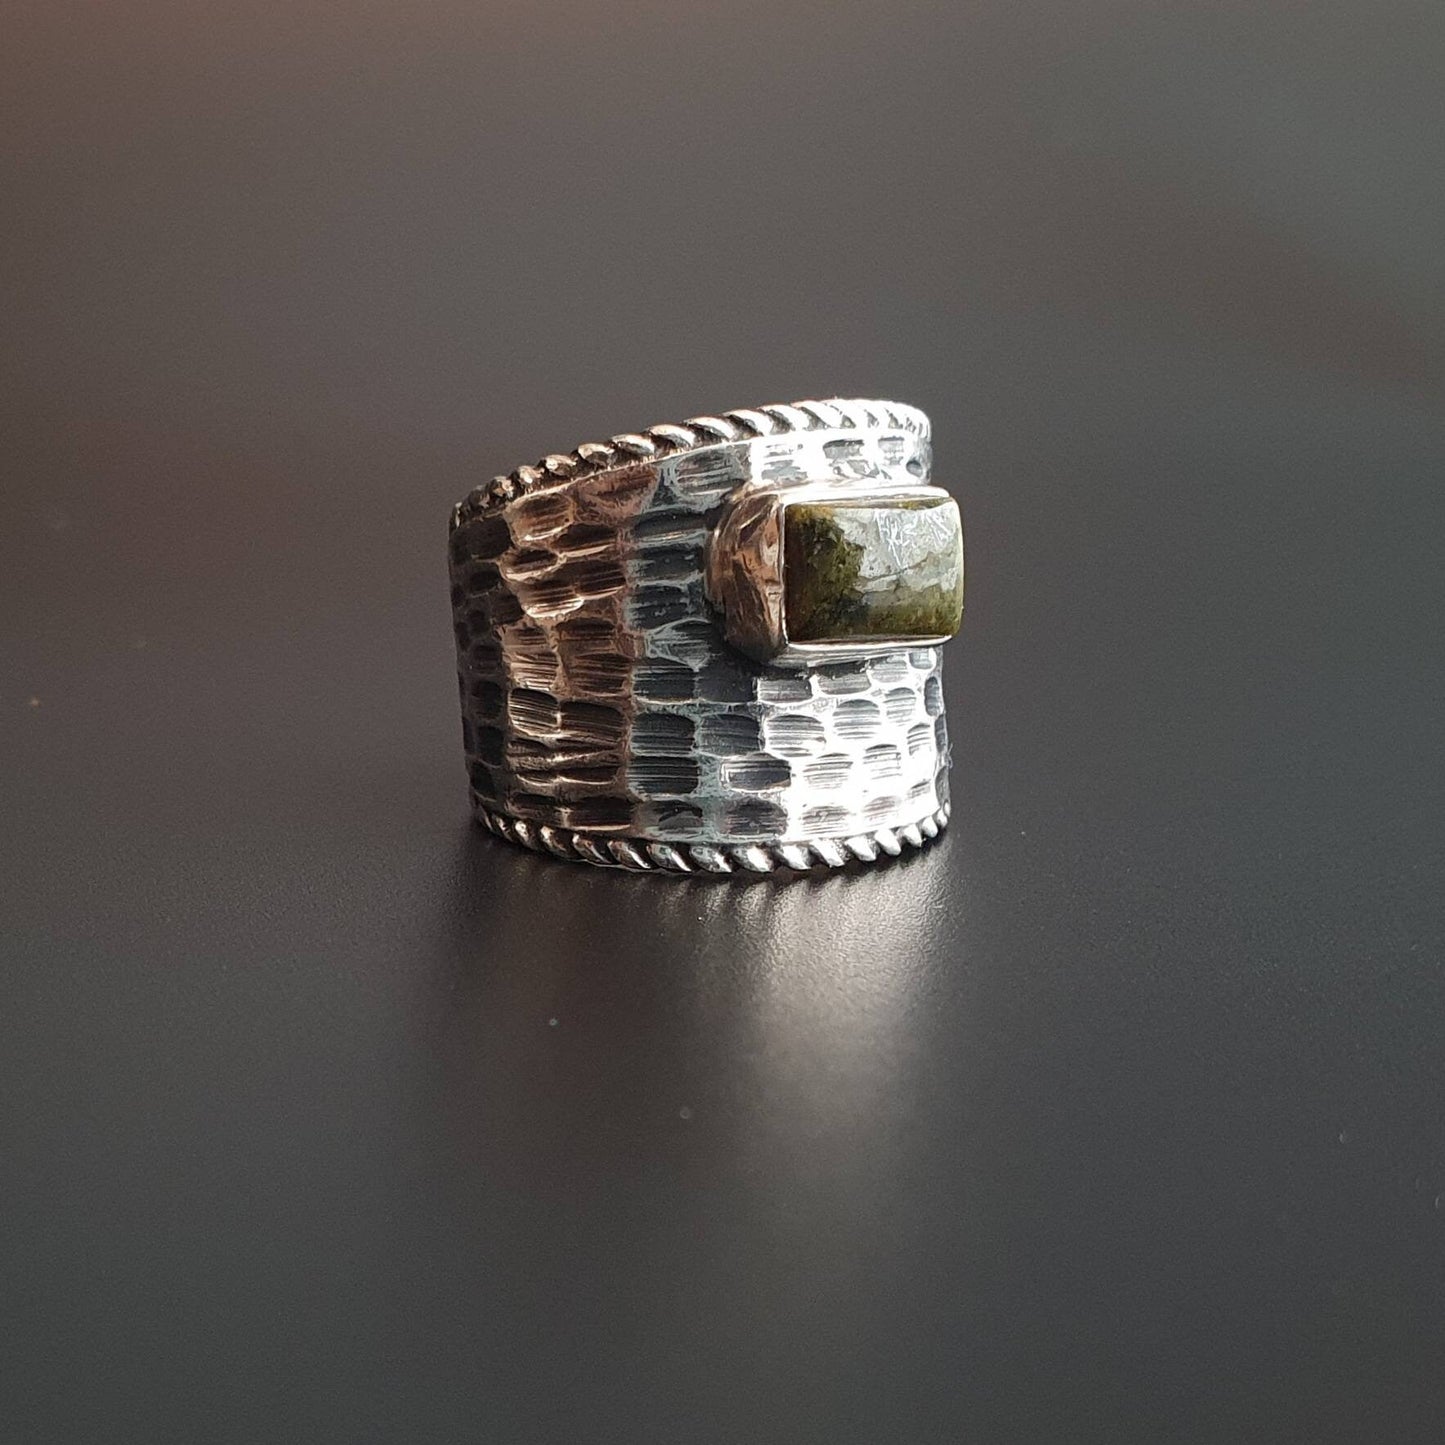 Ring, sterling silver ring, statement ring, handmade, vintage, jewellery, gift's, occasions, gothic, witchy, antique, hammered texture